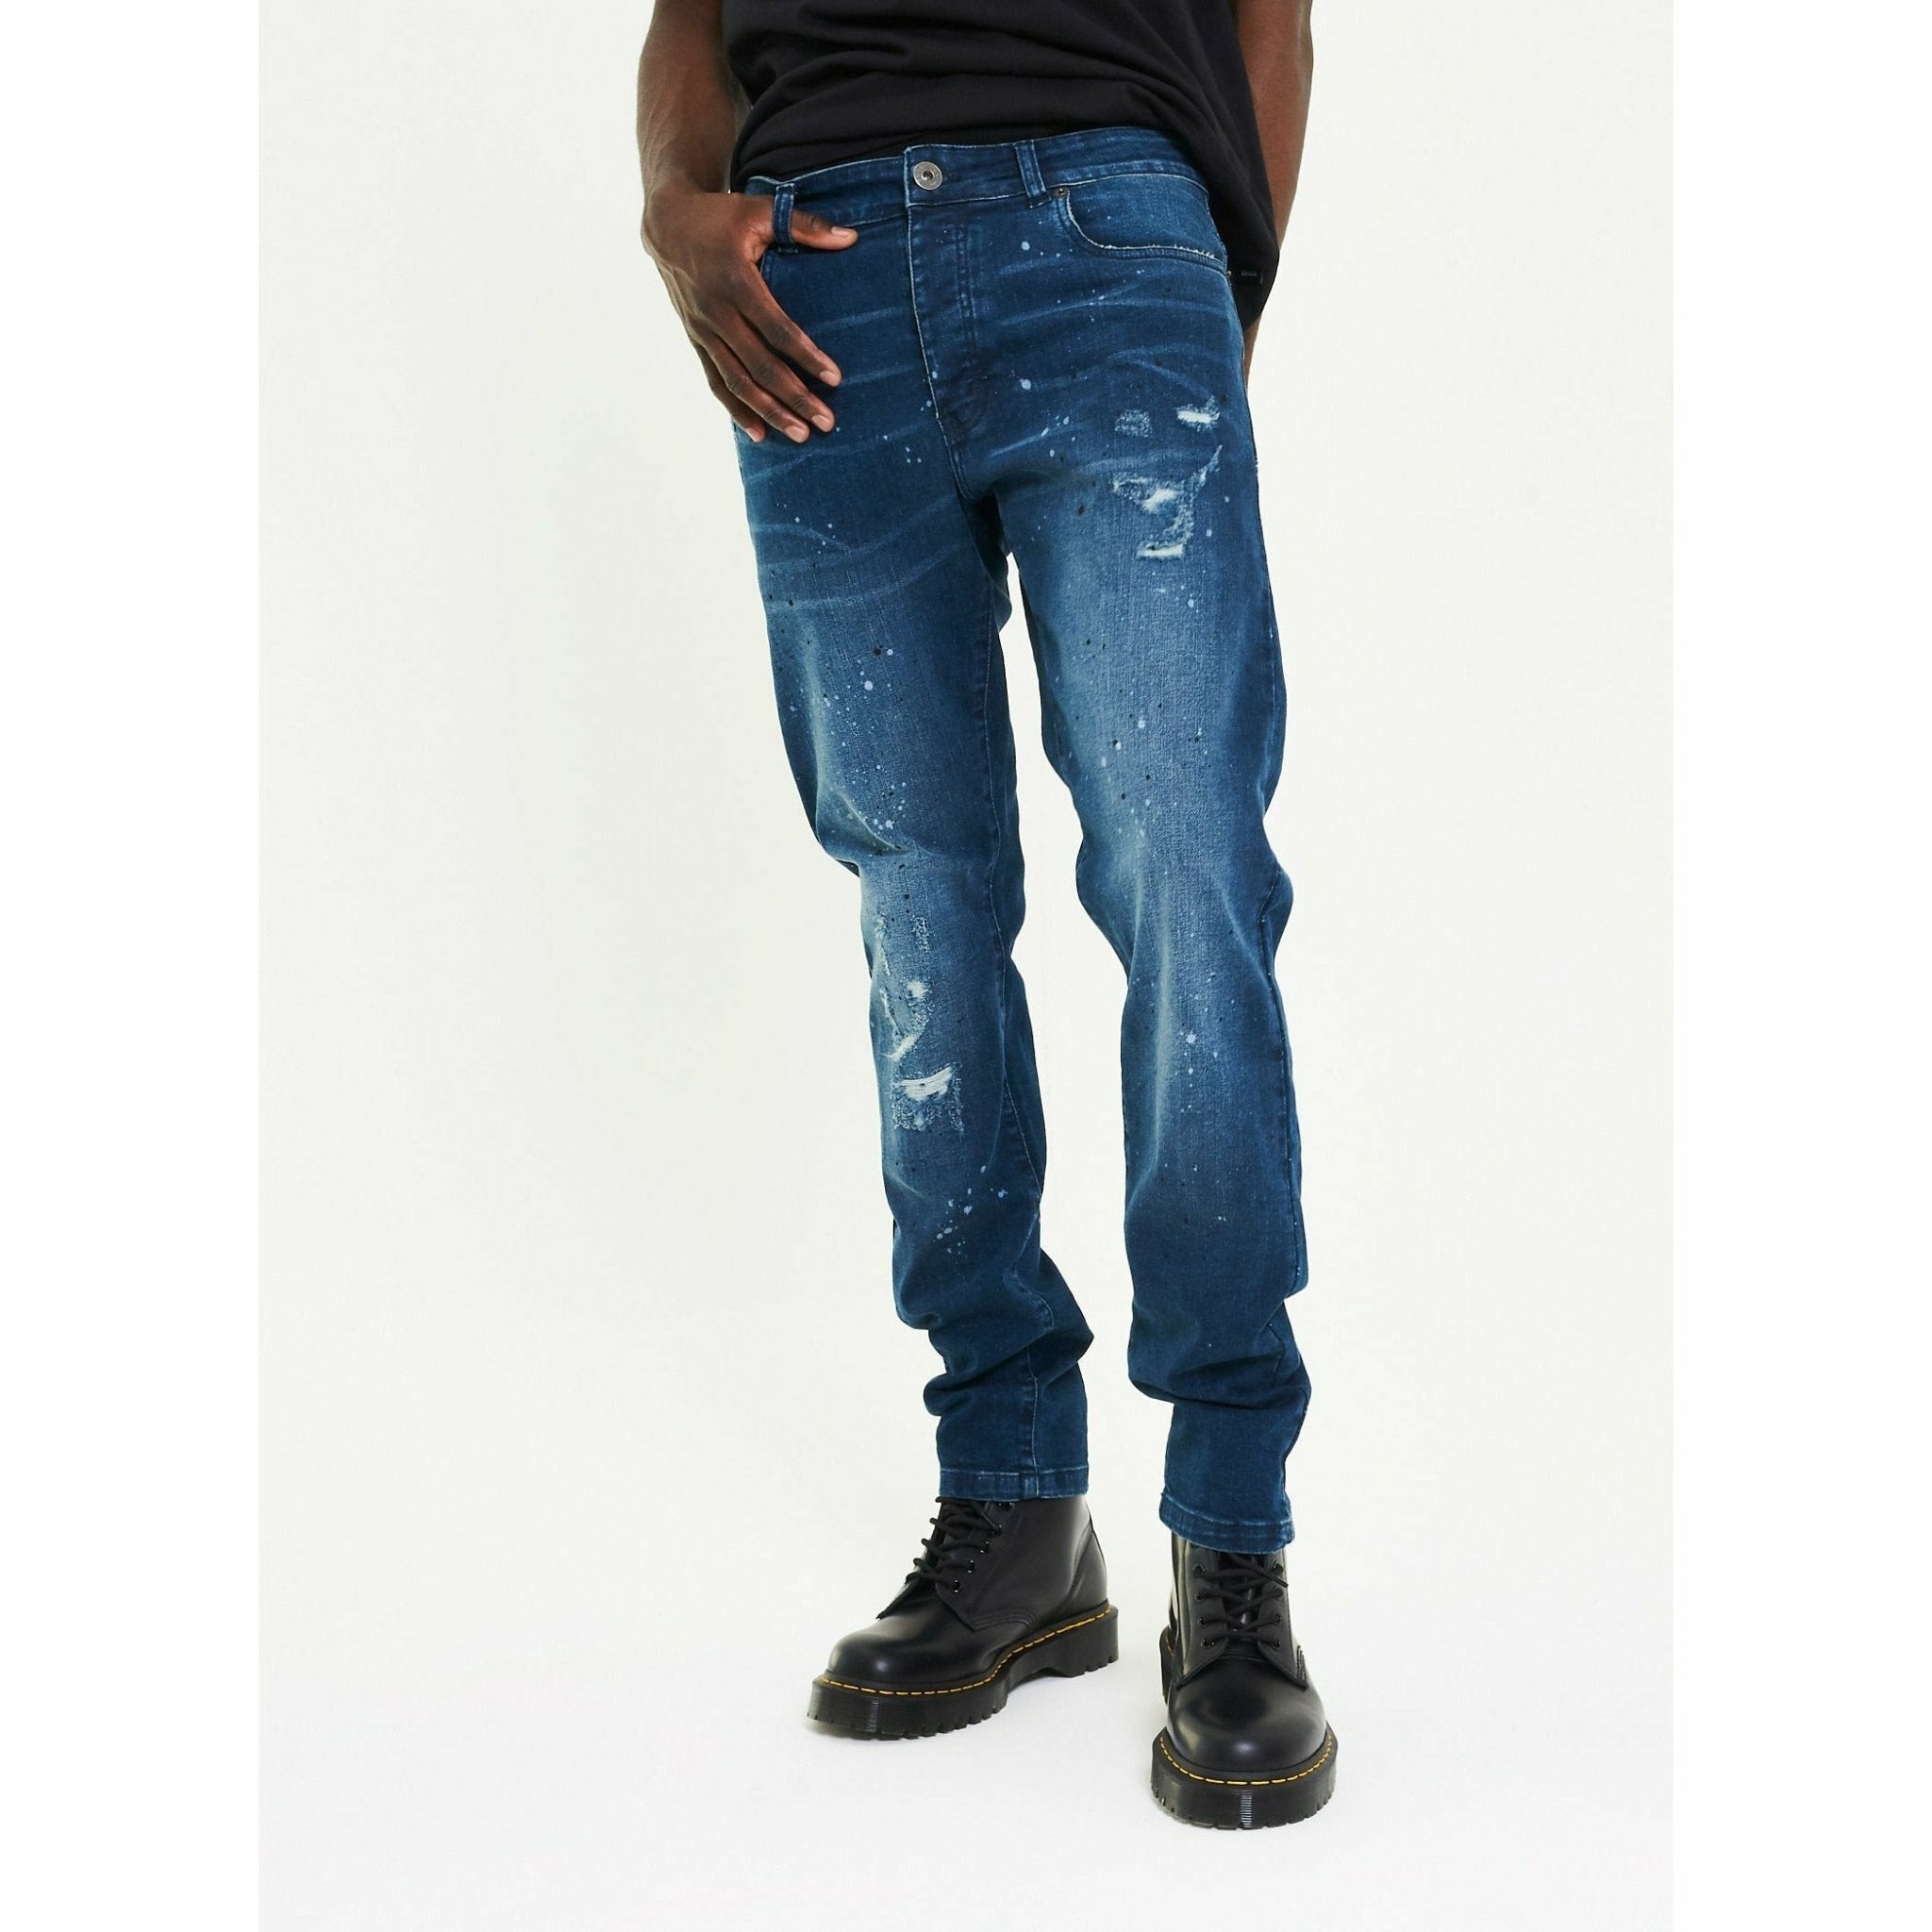 USED/VGC] Bench Daily Jeans/Denim Pants for Men | Shopee Philippines